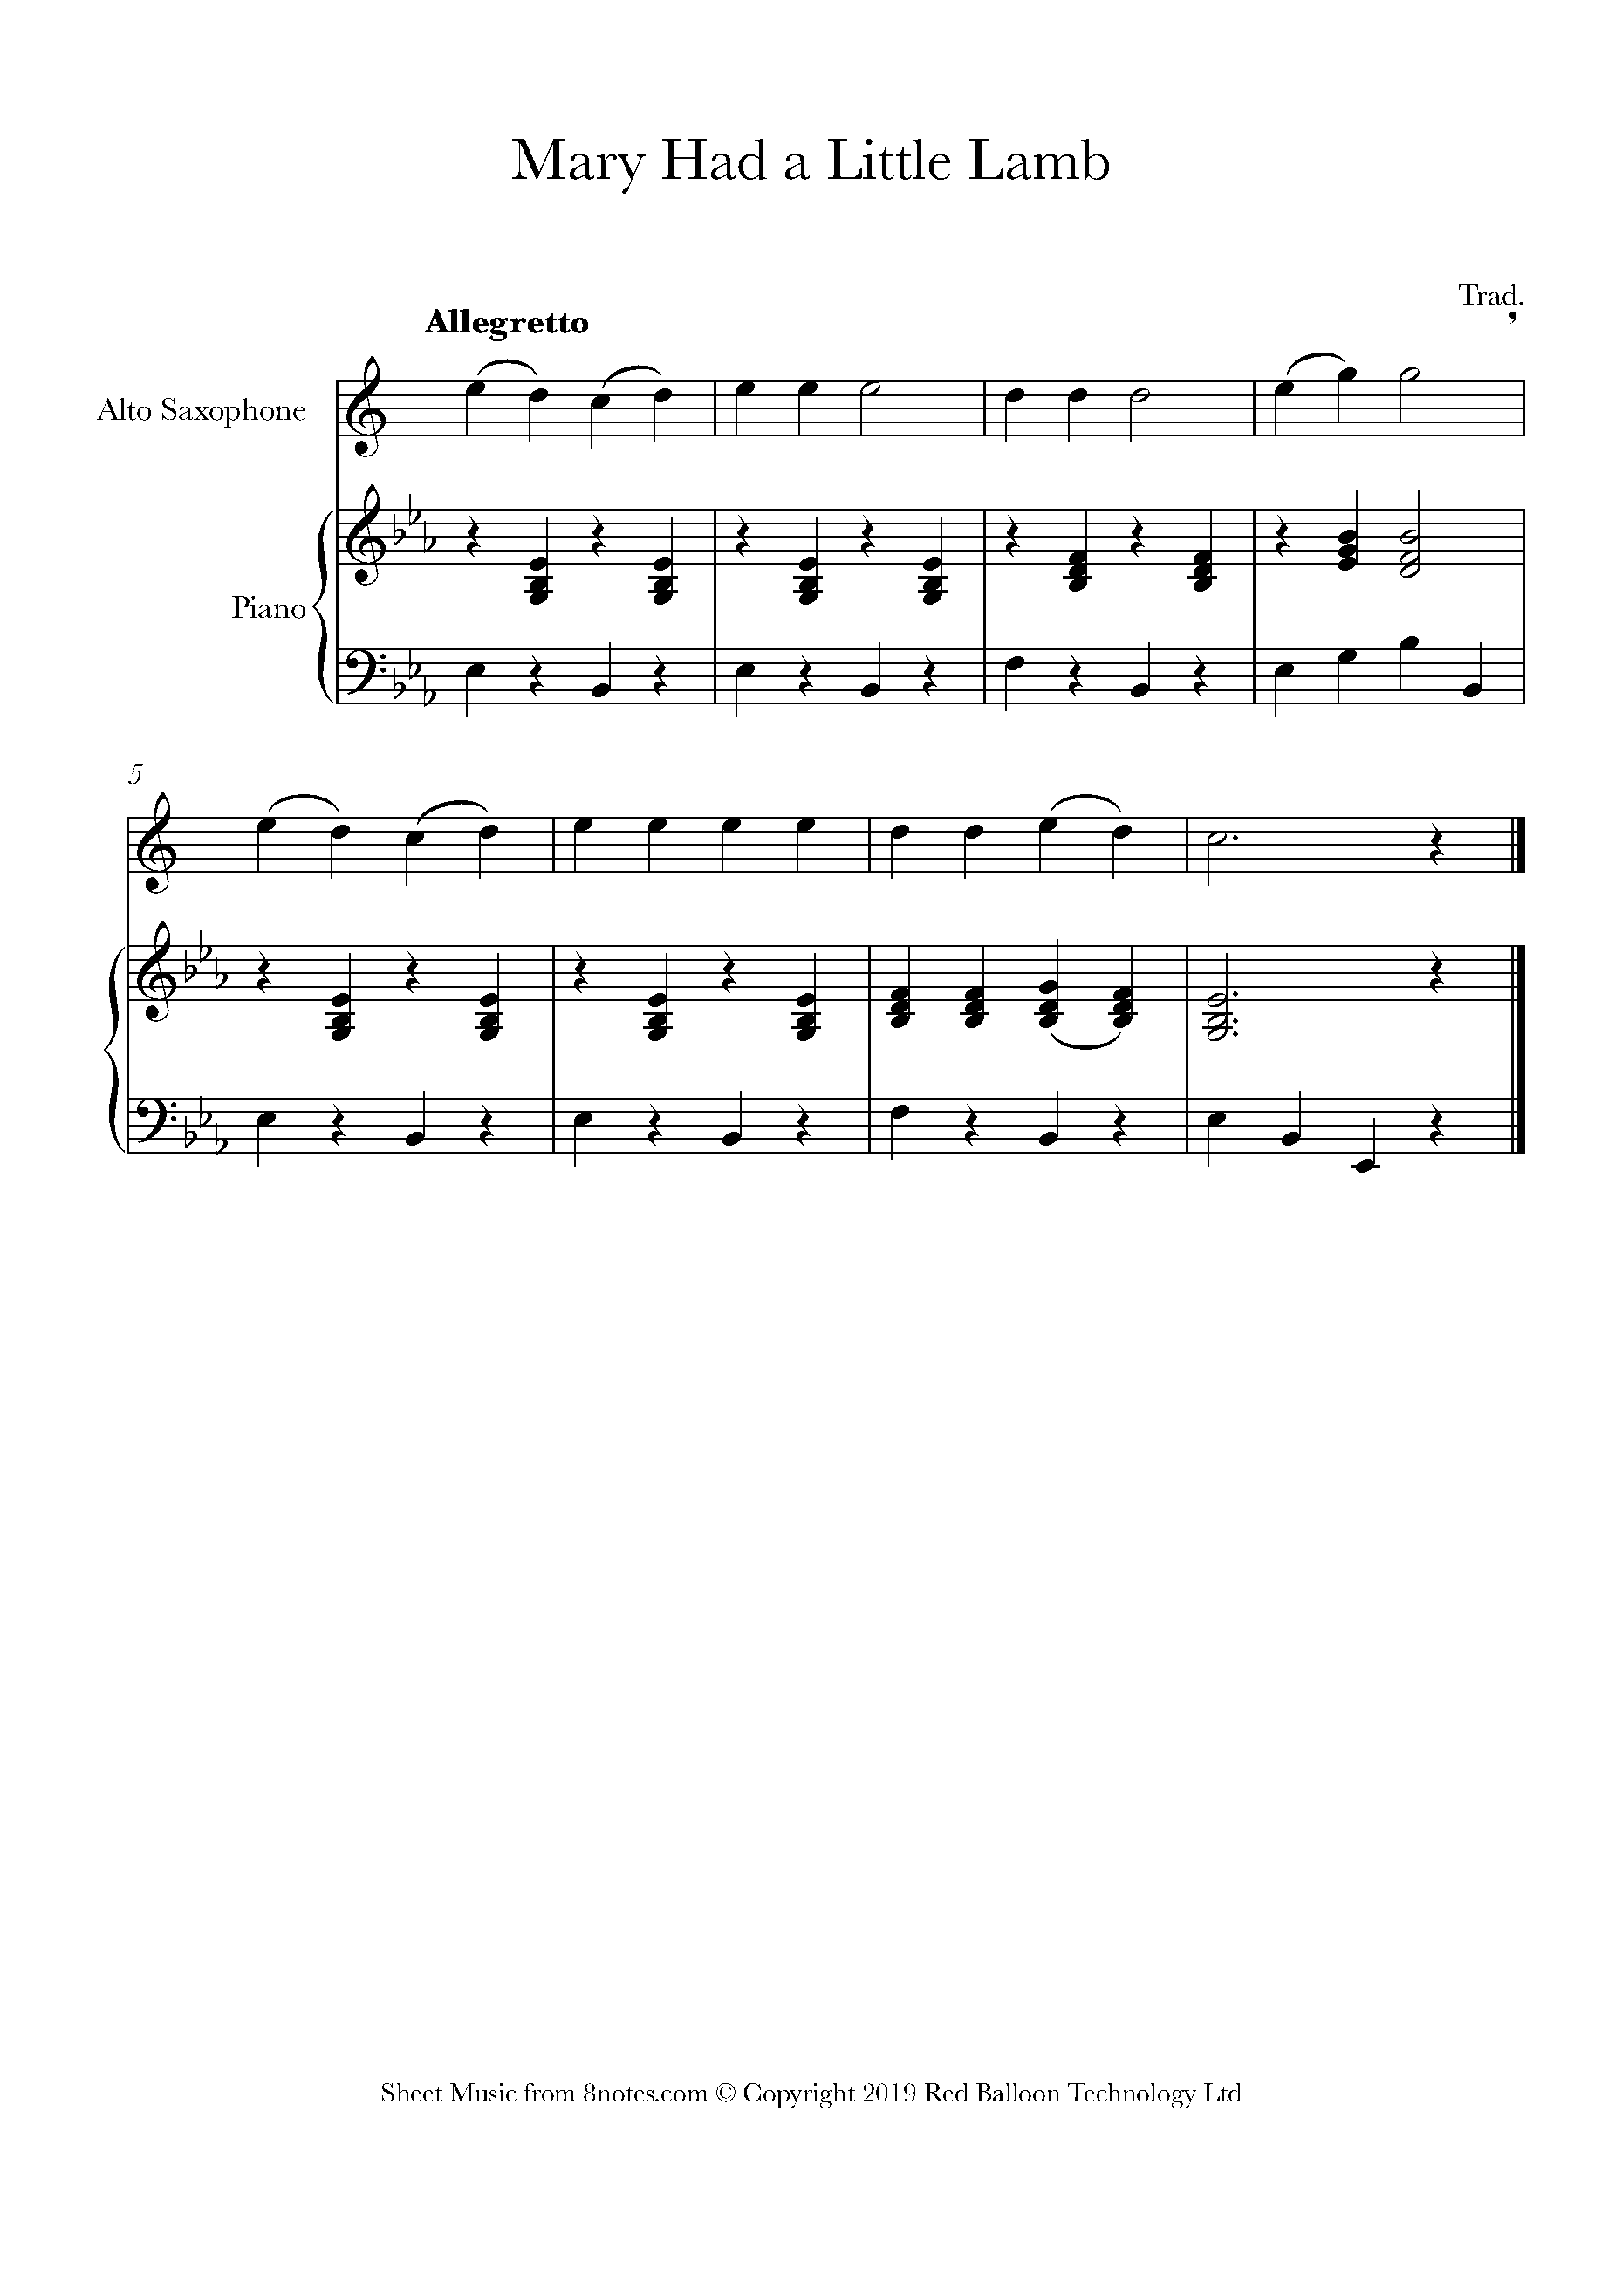 mary-had-a-little-lamb-sheet-music-for-saxophone-8notes